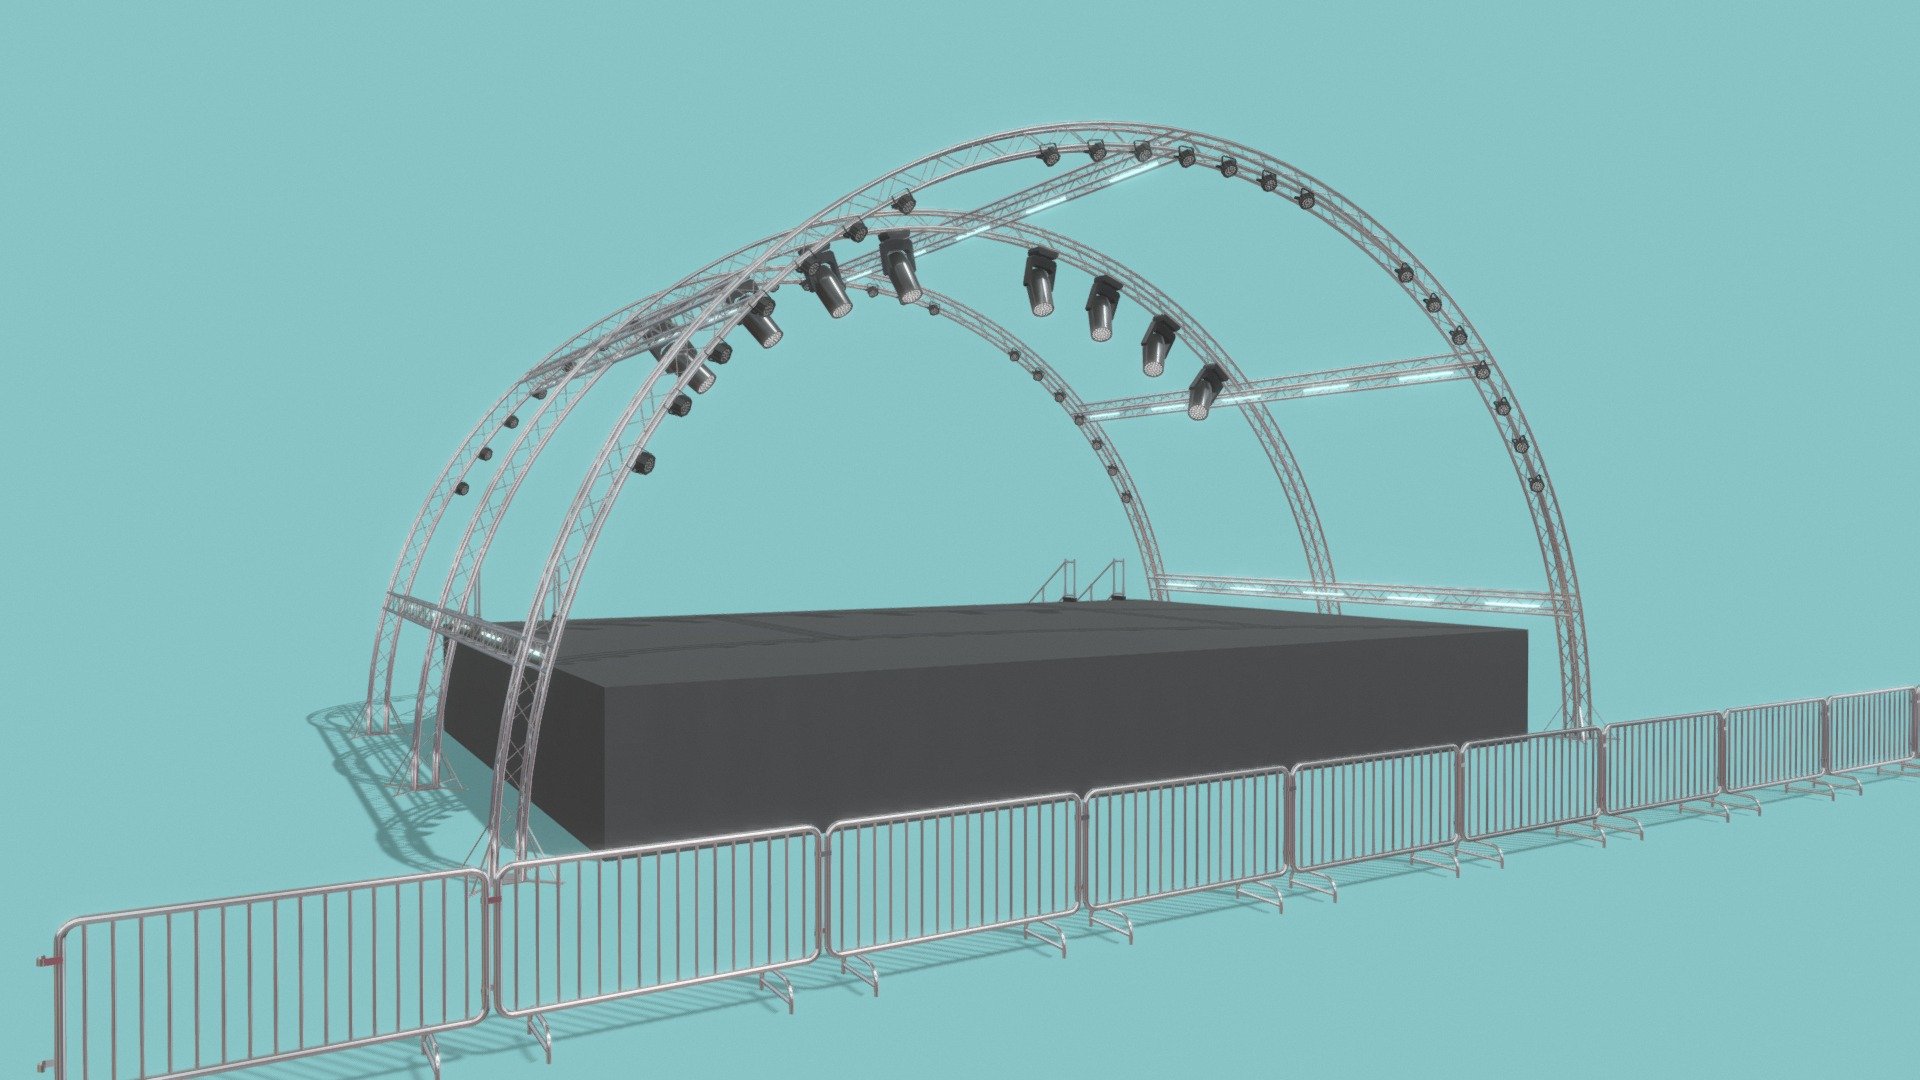 Concert Stage 9

Measurements:




Platform is: L: 14.0m, W: 9.5m, H: 1.7m

Inner height (from the top of the platform to the highest part of the arch): 6.1m

Total height from bottom to top: 8.1m

Half circle truss diameter: 16m

IMPORTANT NOTES:




This model does not have textures or materials, but it has separate generic materials, it is also separated into parts, so you can easily assign your own materials.

If you have any doubts or questions about this model, you can send us a message 3d model